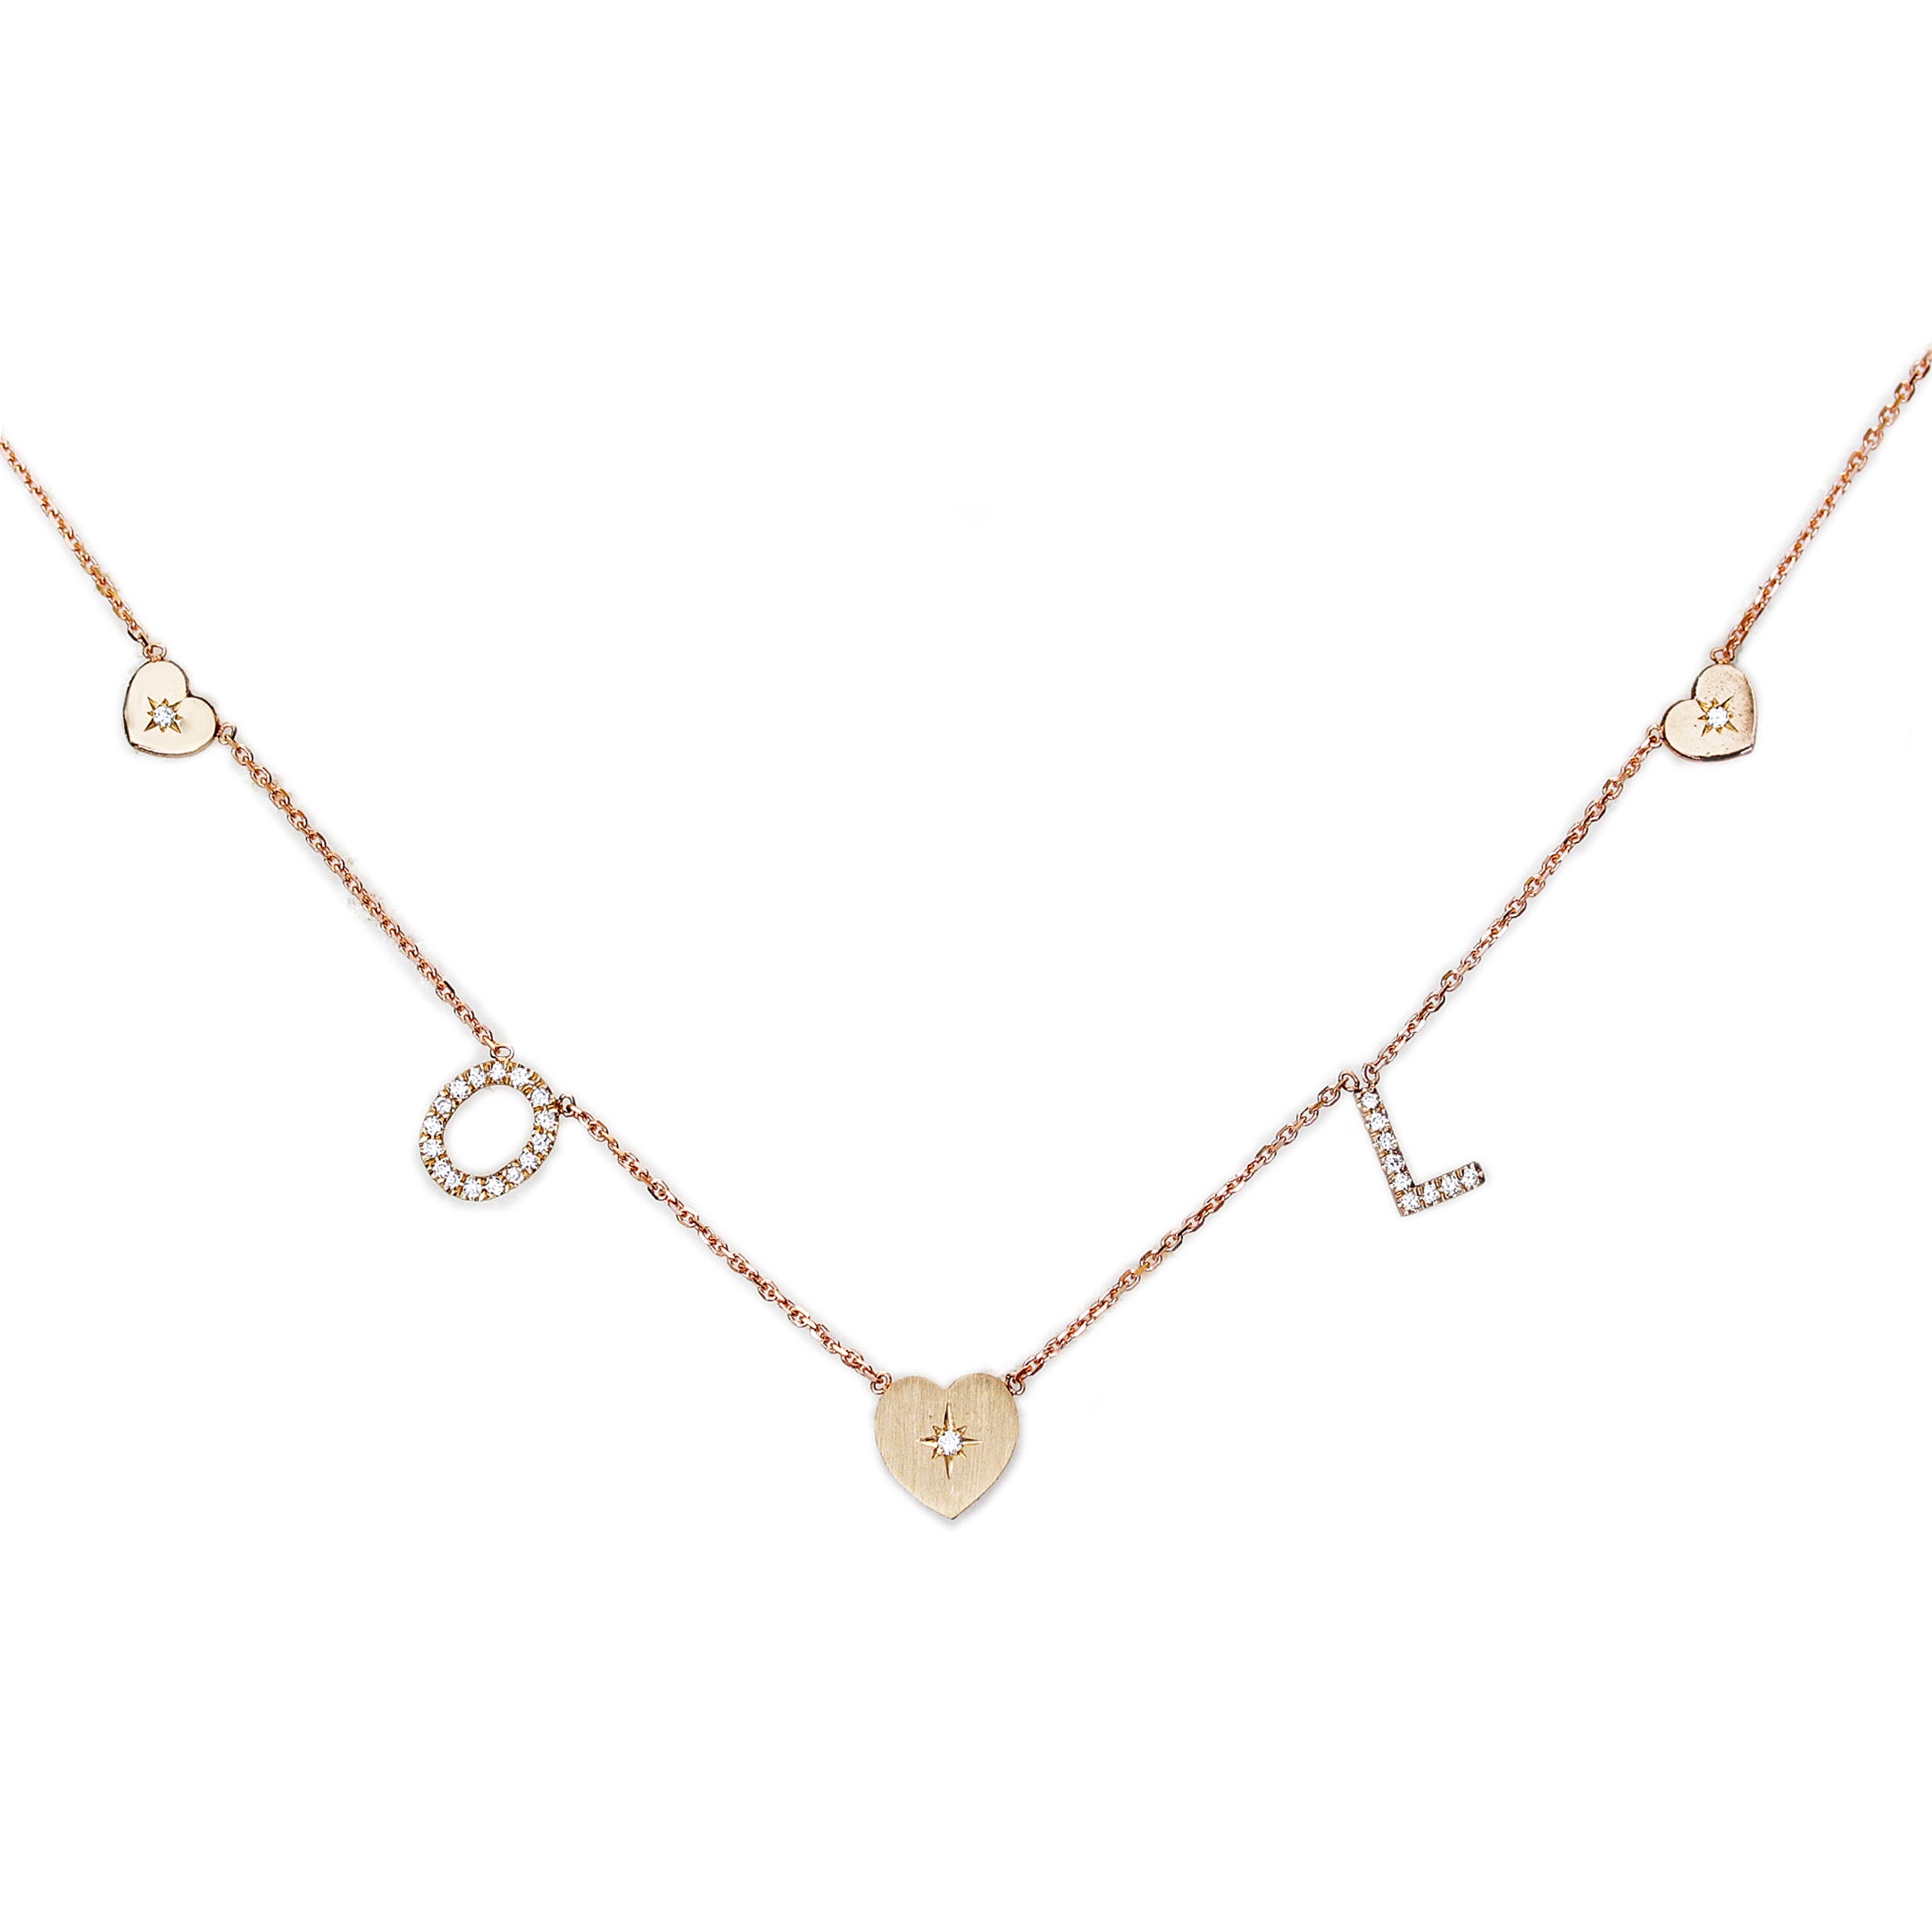 Hearts and Two Initials Pave Diamond Personalized Necklace